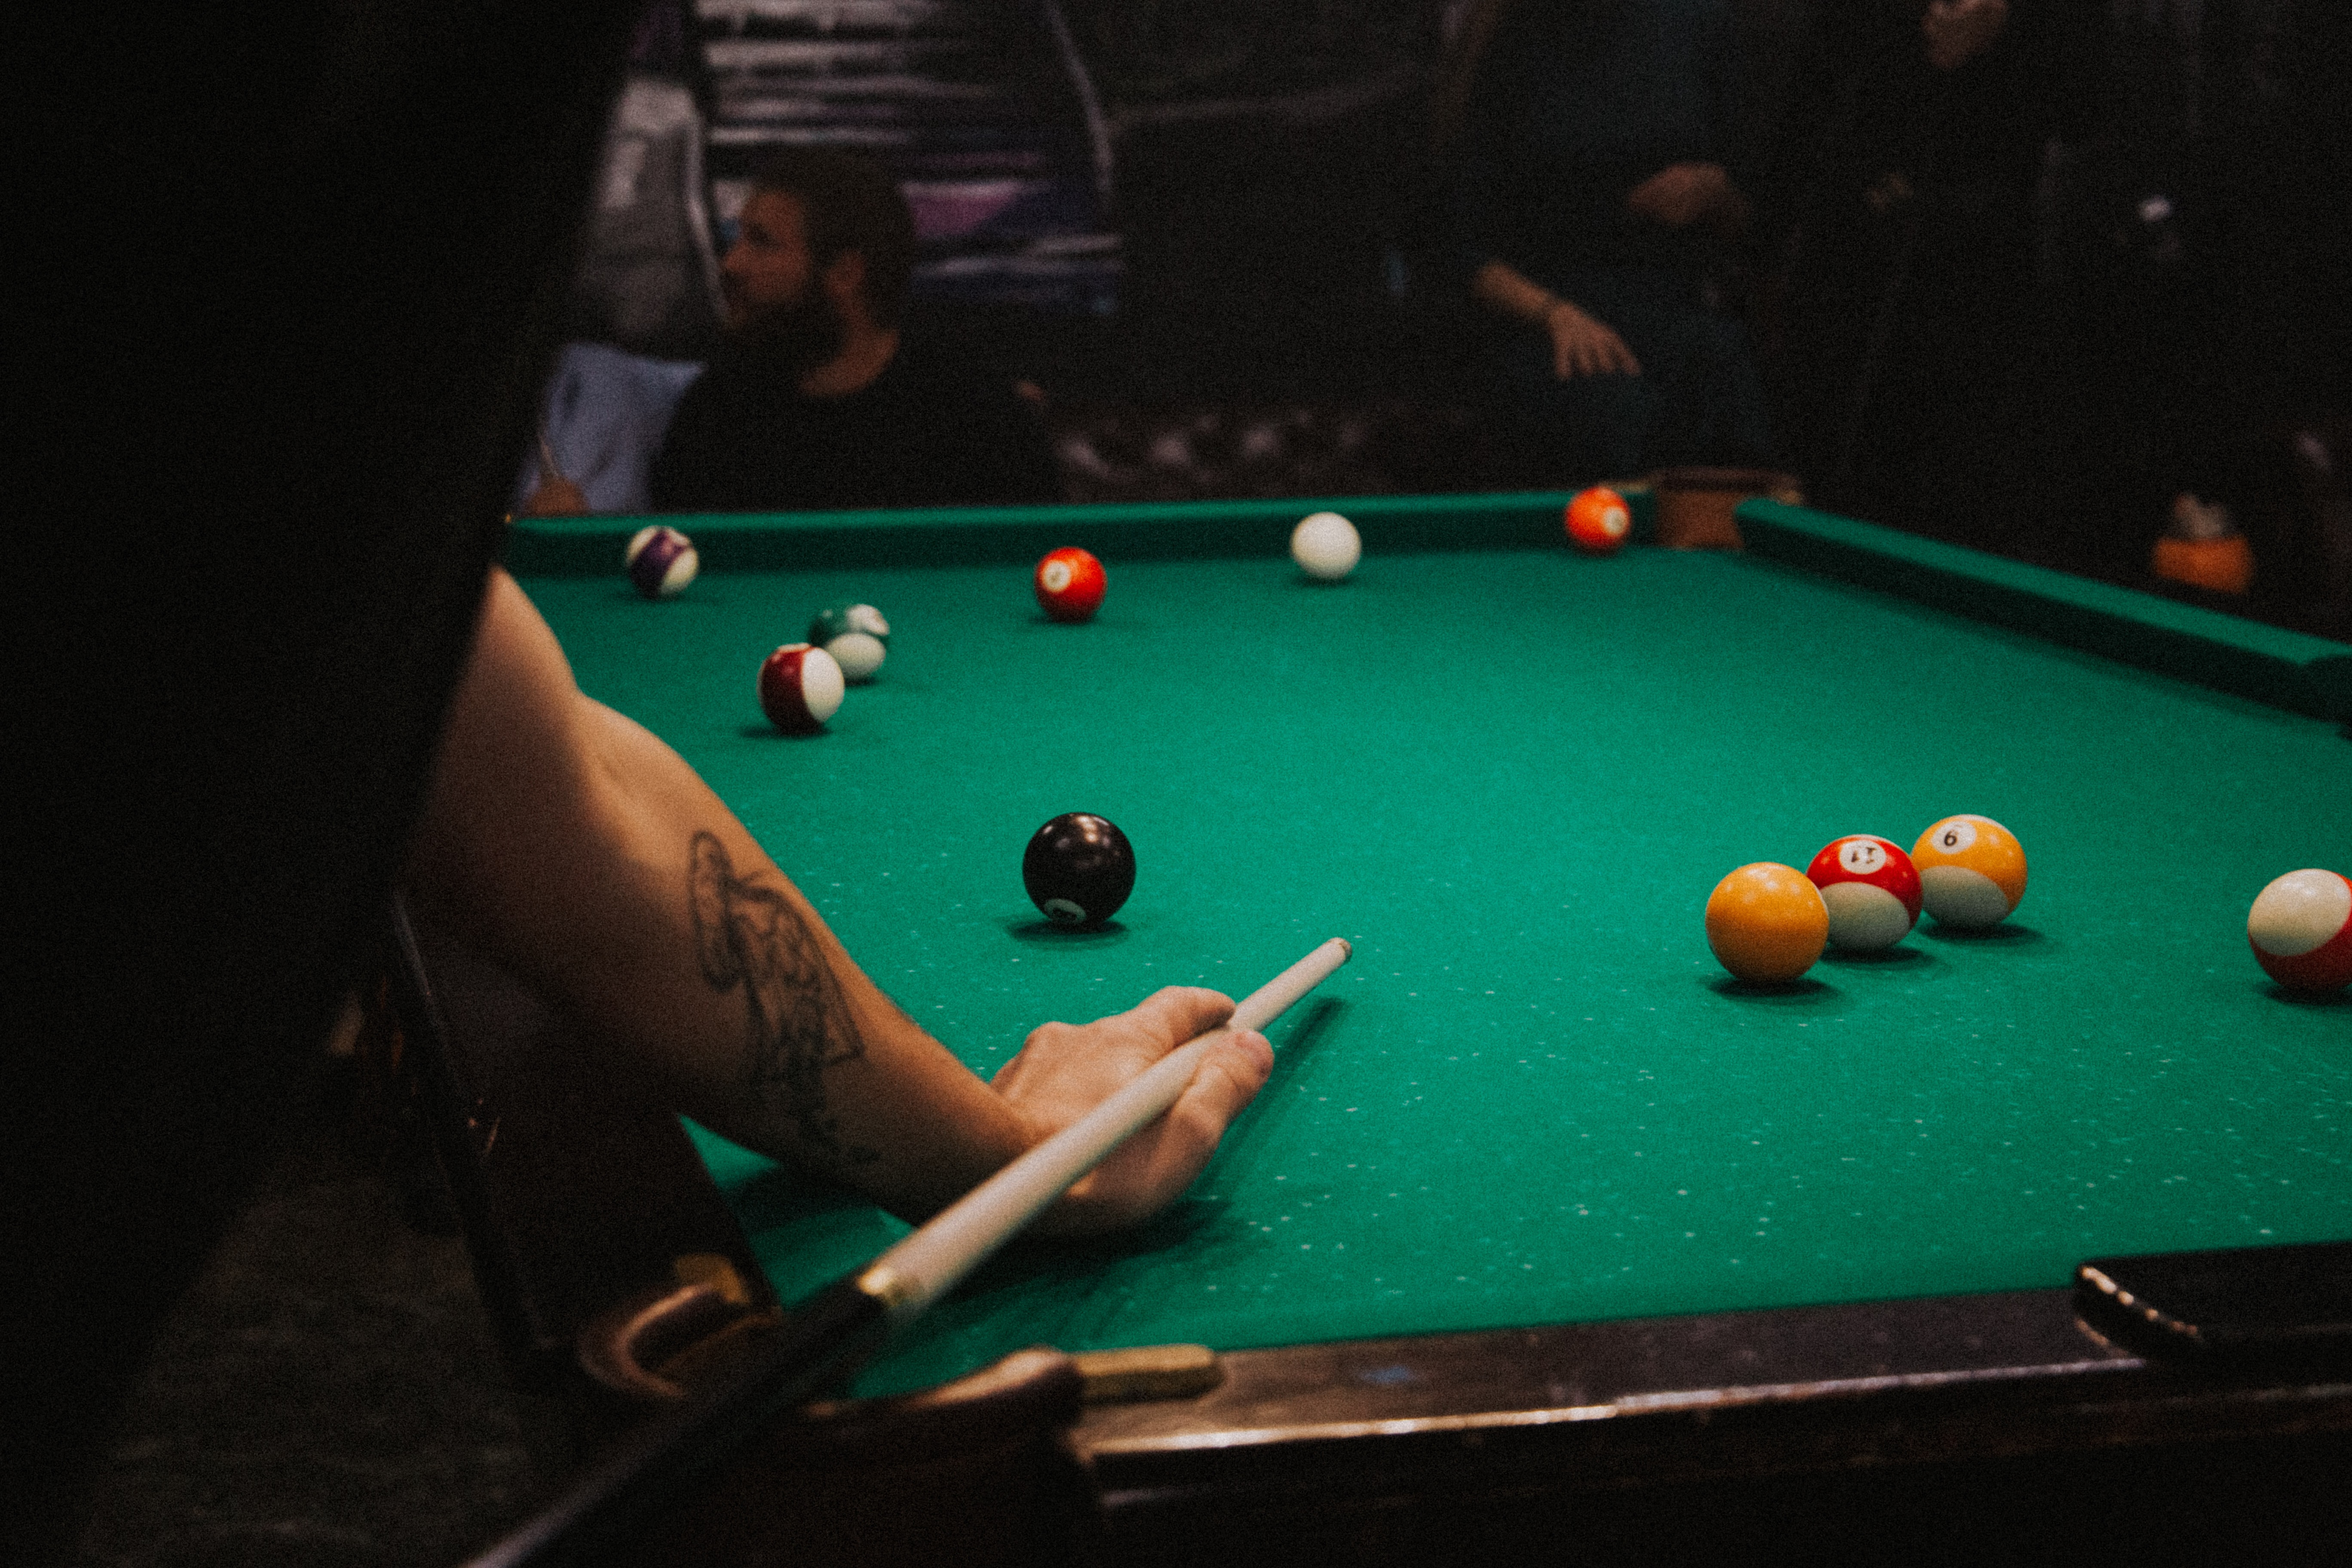 Billiards player lining up a shot